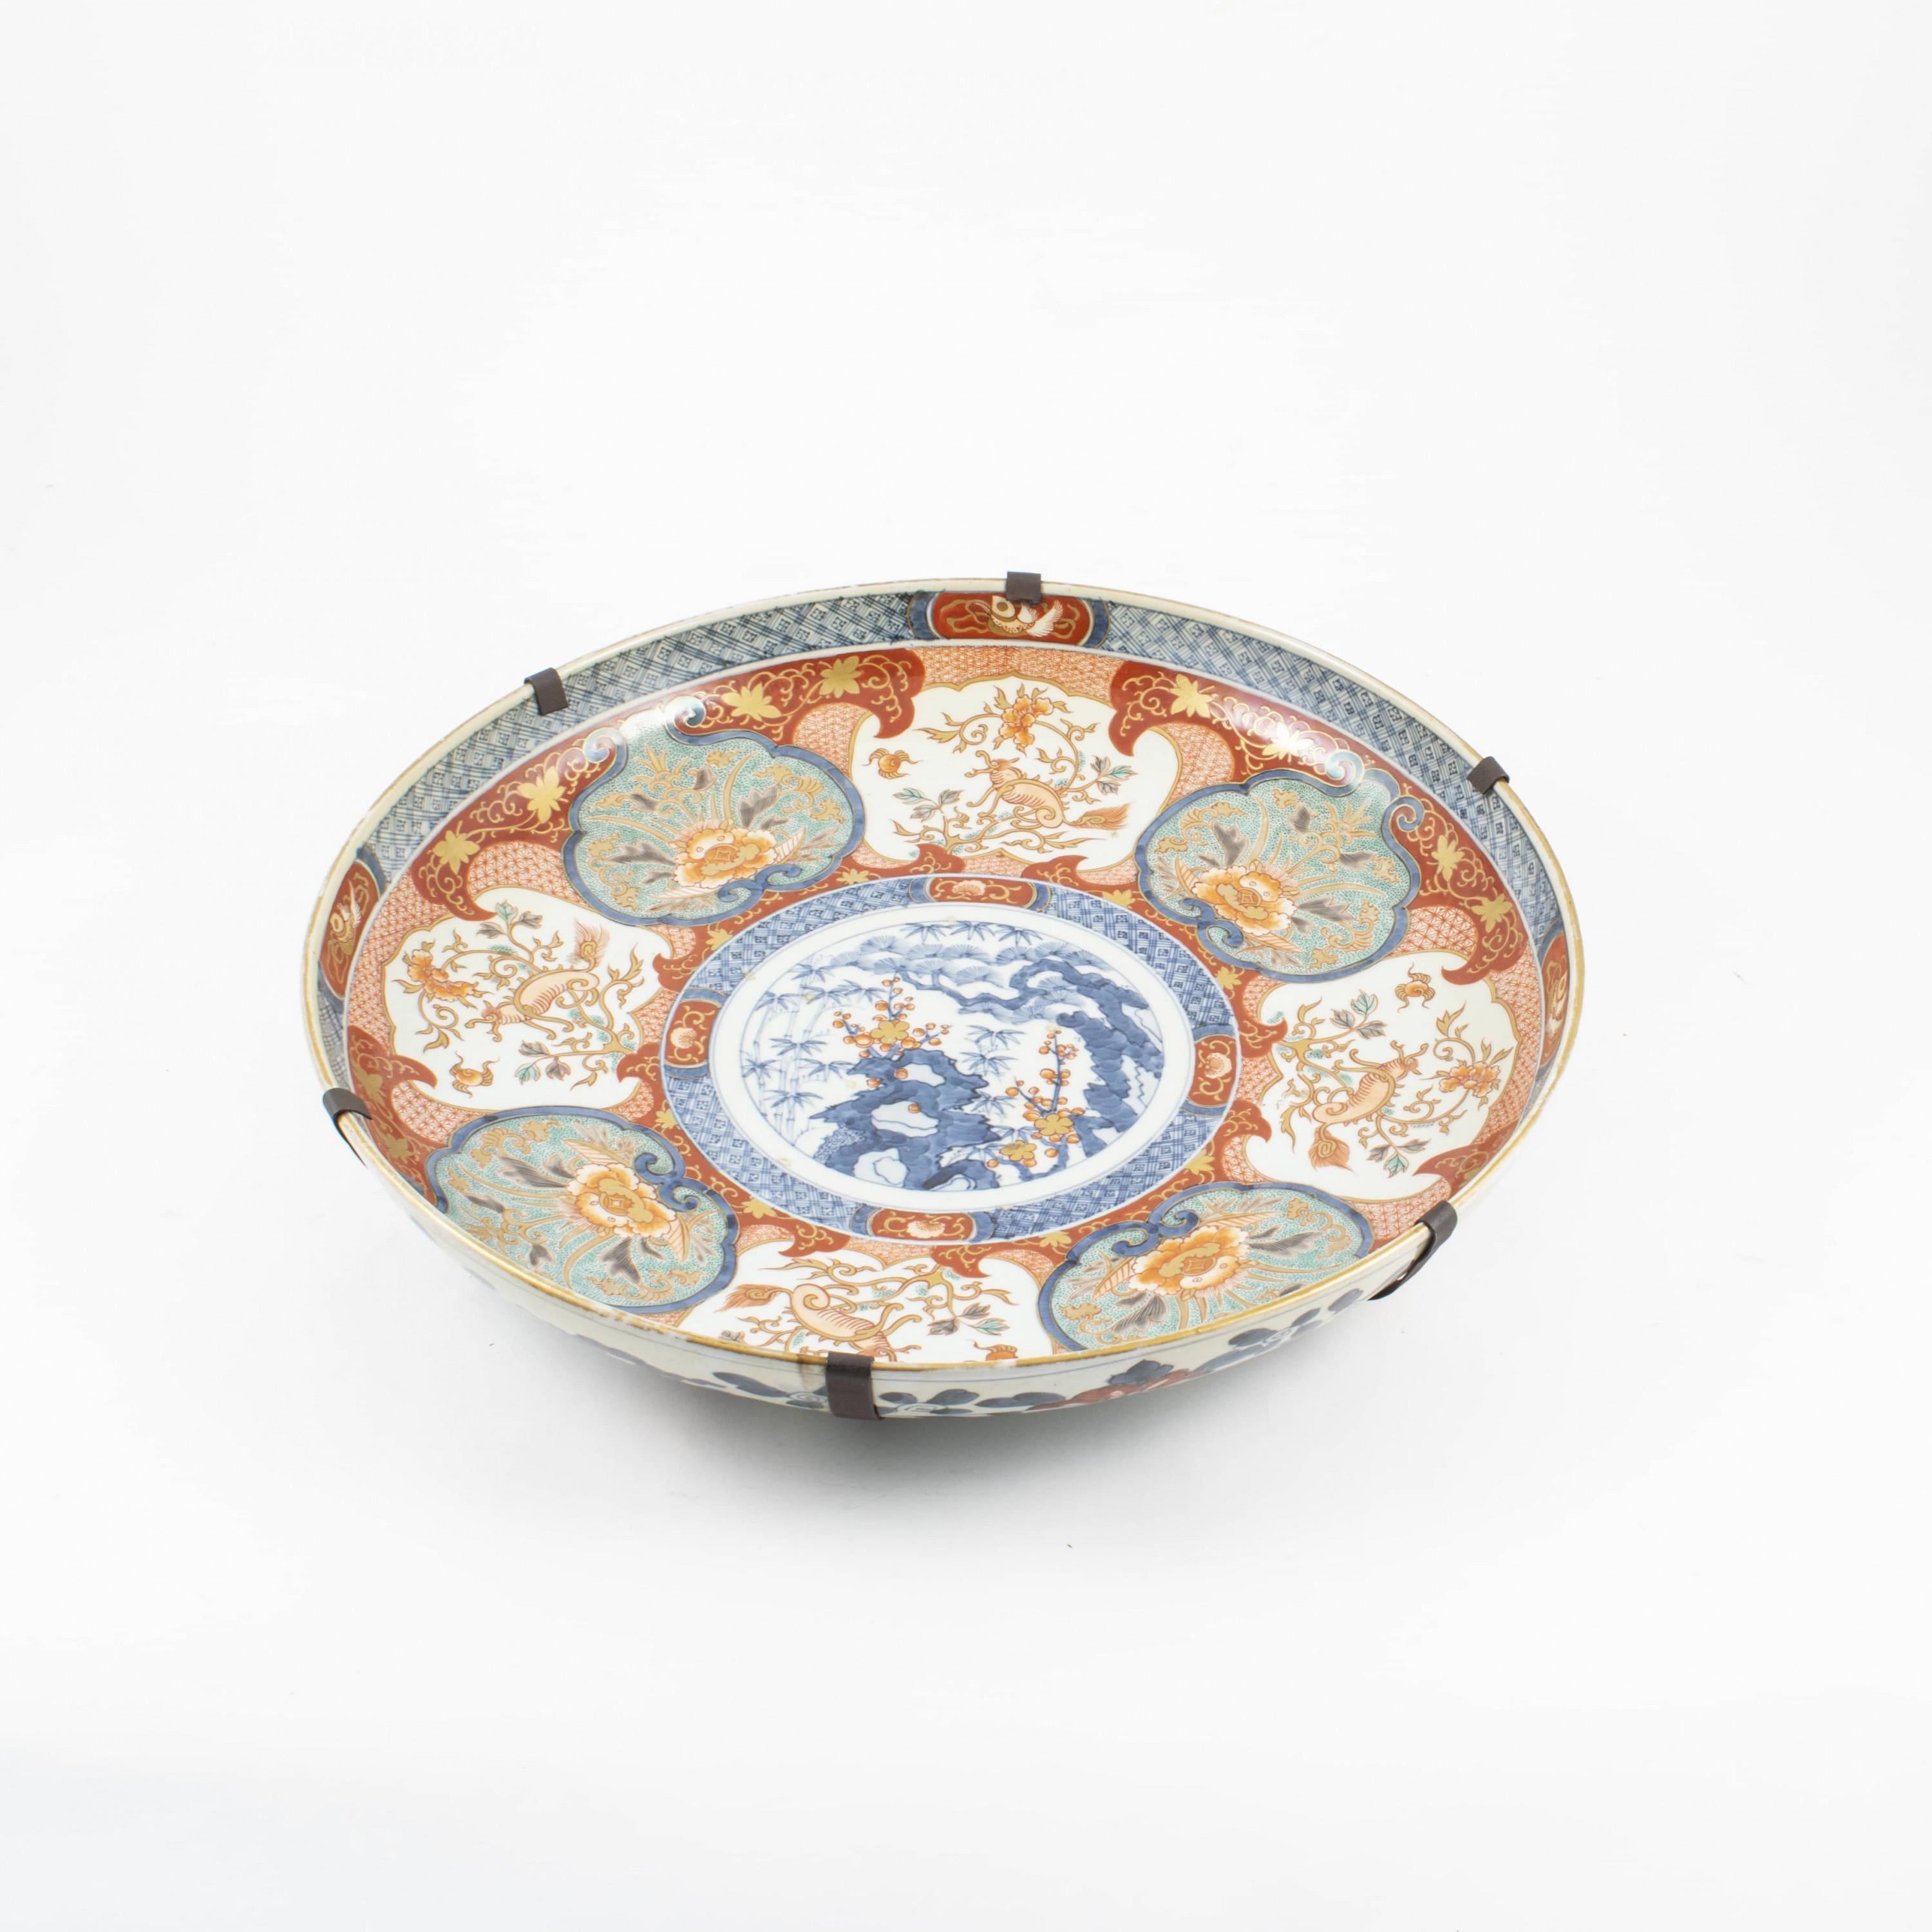 A large Japanese porcelain charger dating from the Meiji era (1868-1912).
Hand painted with polychrome colors. Gilt edge shows signs of wear but otherwise in mint condition.

Measure: Diameter 37 cm. Height 8 cm.
From the Meiji Period 1852-1912,